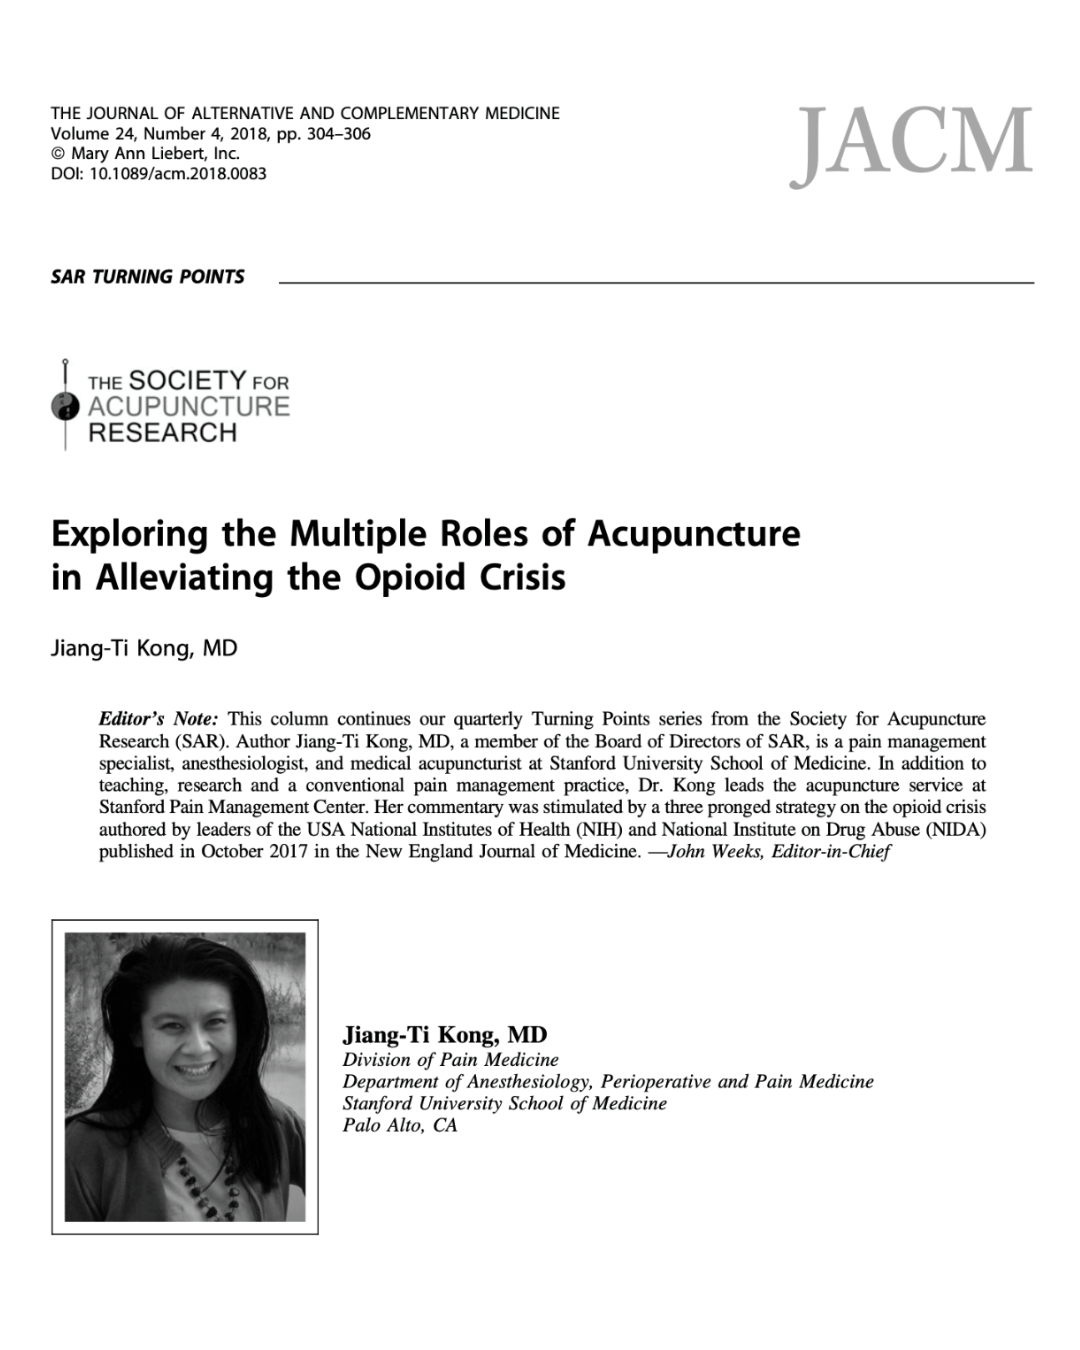 Exploring the Multiple Roles of Acupuncture in Alleviating the Opioid Crisis